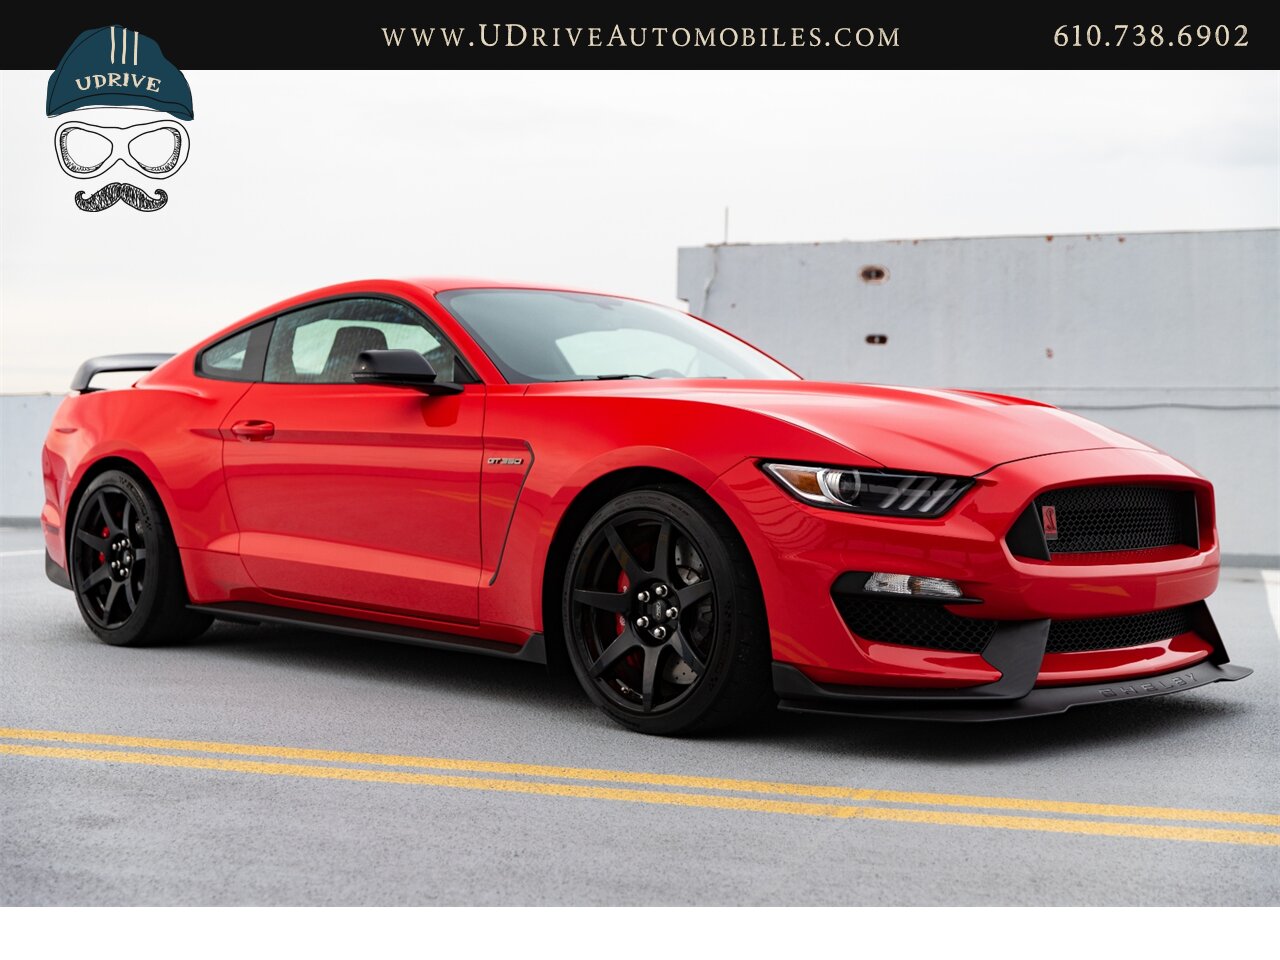 2016 Ford Mustang Shelby GT350R 3k Miles Electronics Pkg  1 of 32 Race Red Produced for USA As New - Photo 19 - West Chester, PA 19382